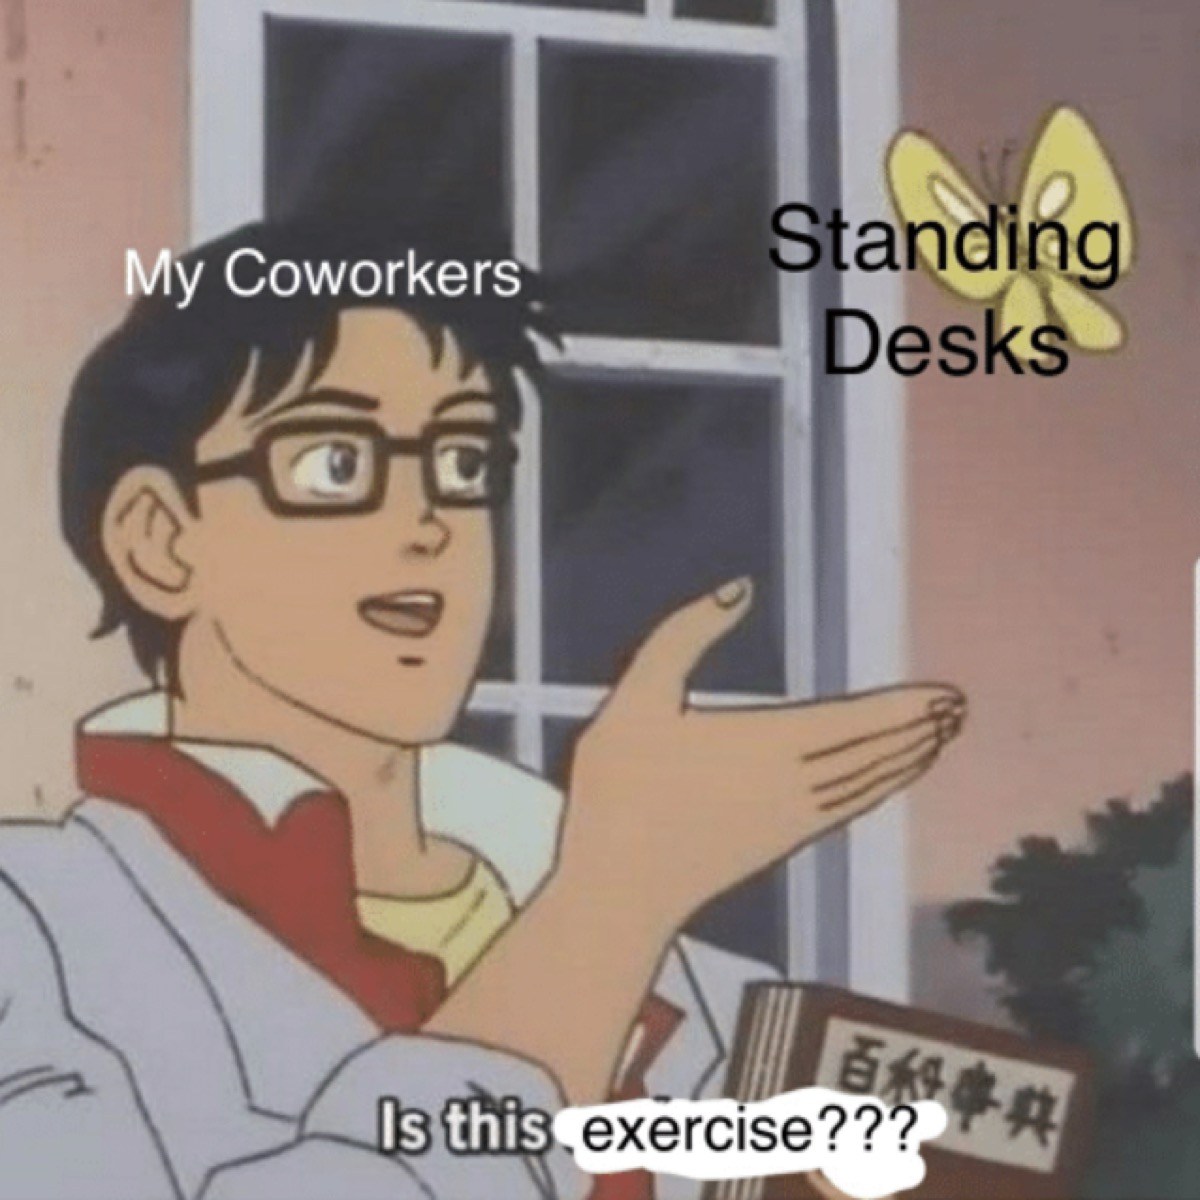 My Coworkers Standing Desks Is this exercise???